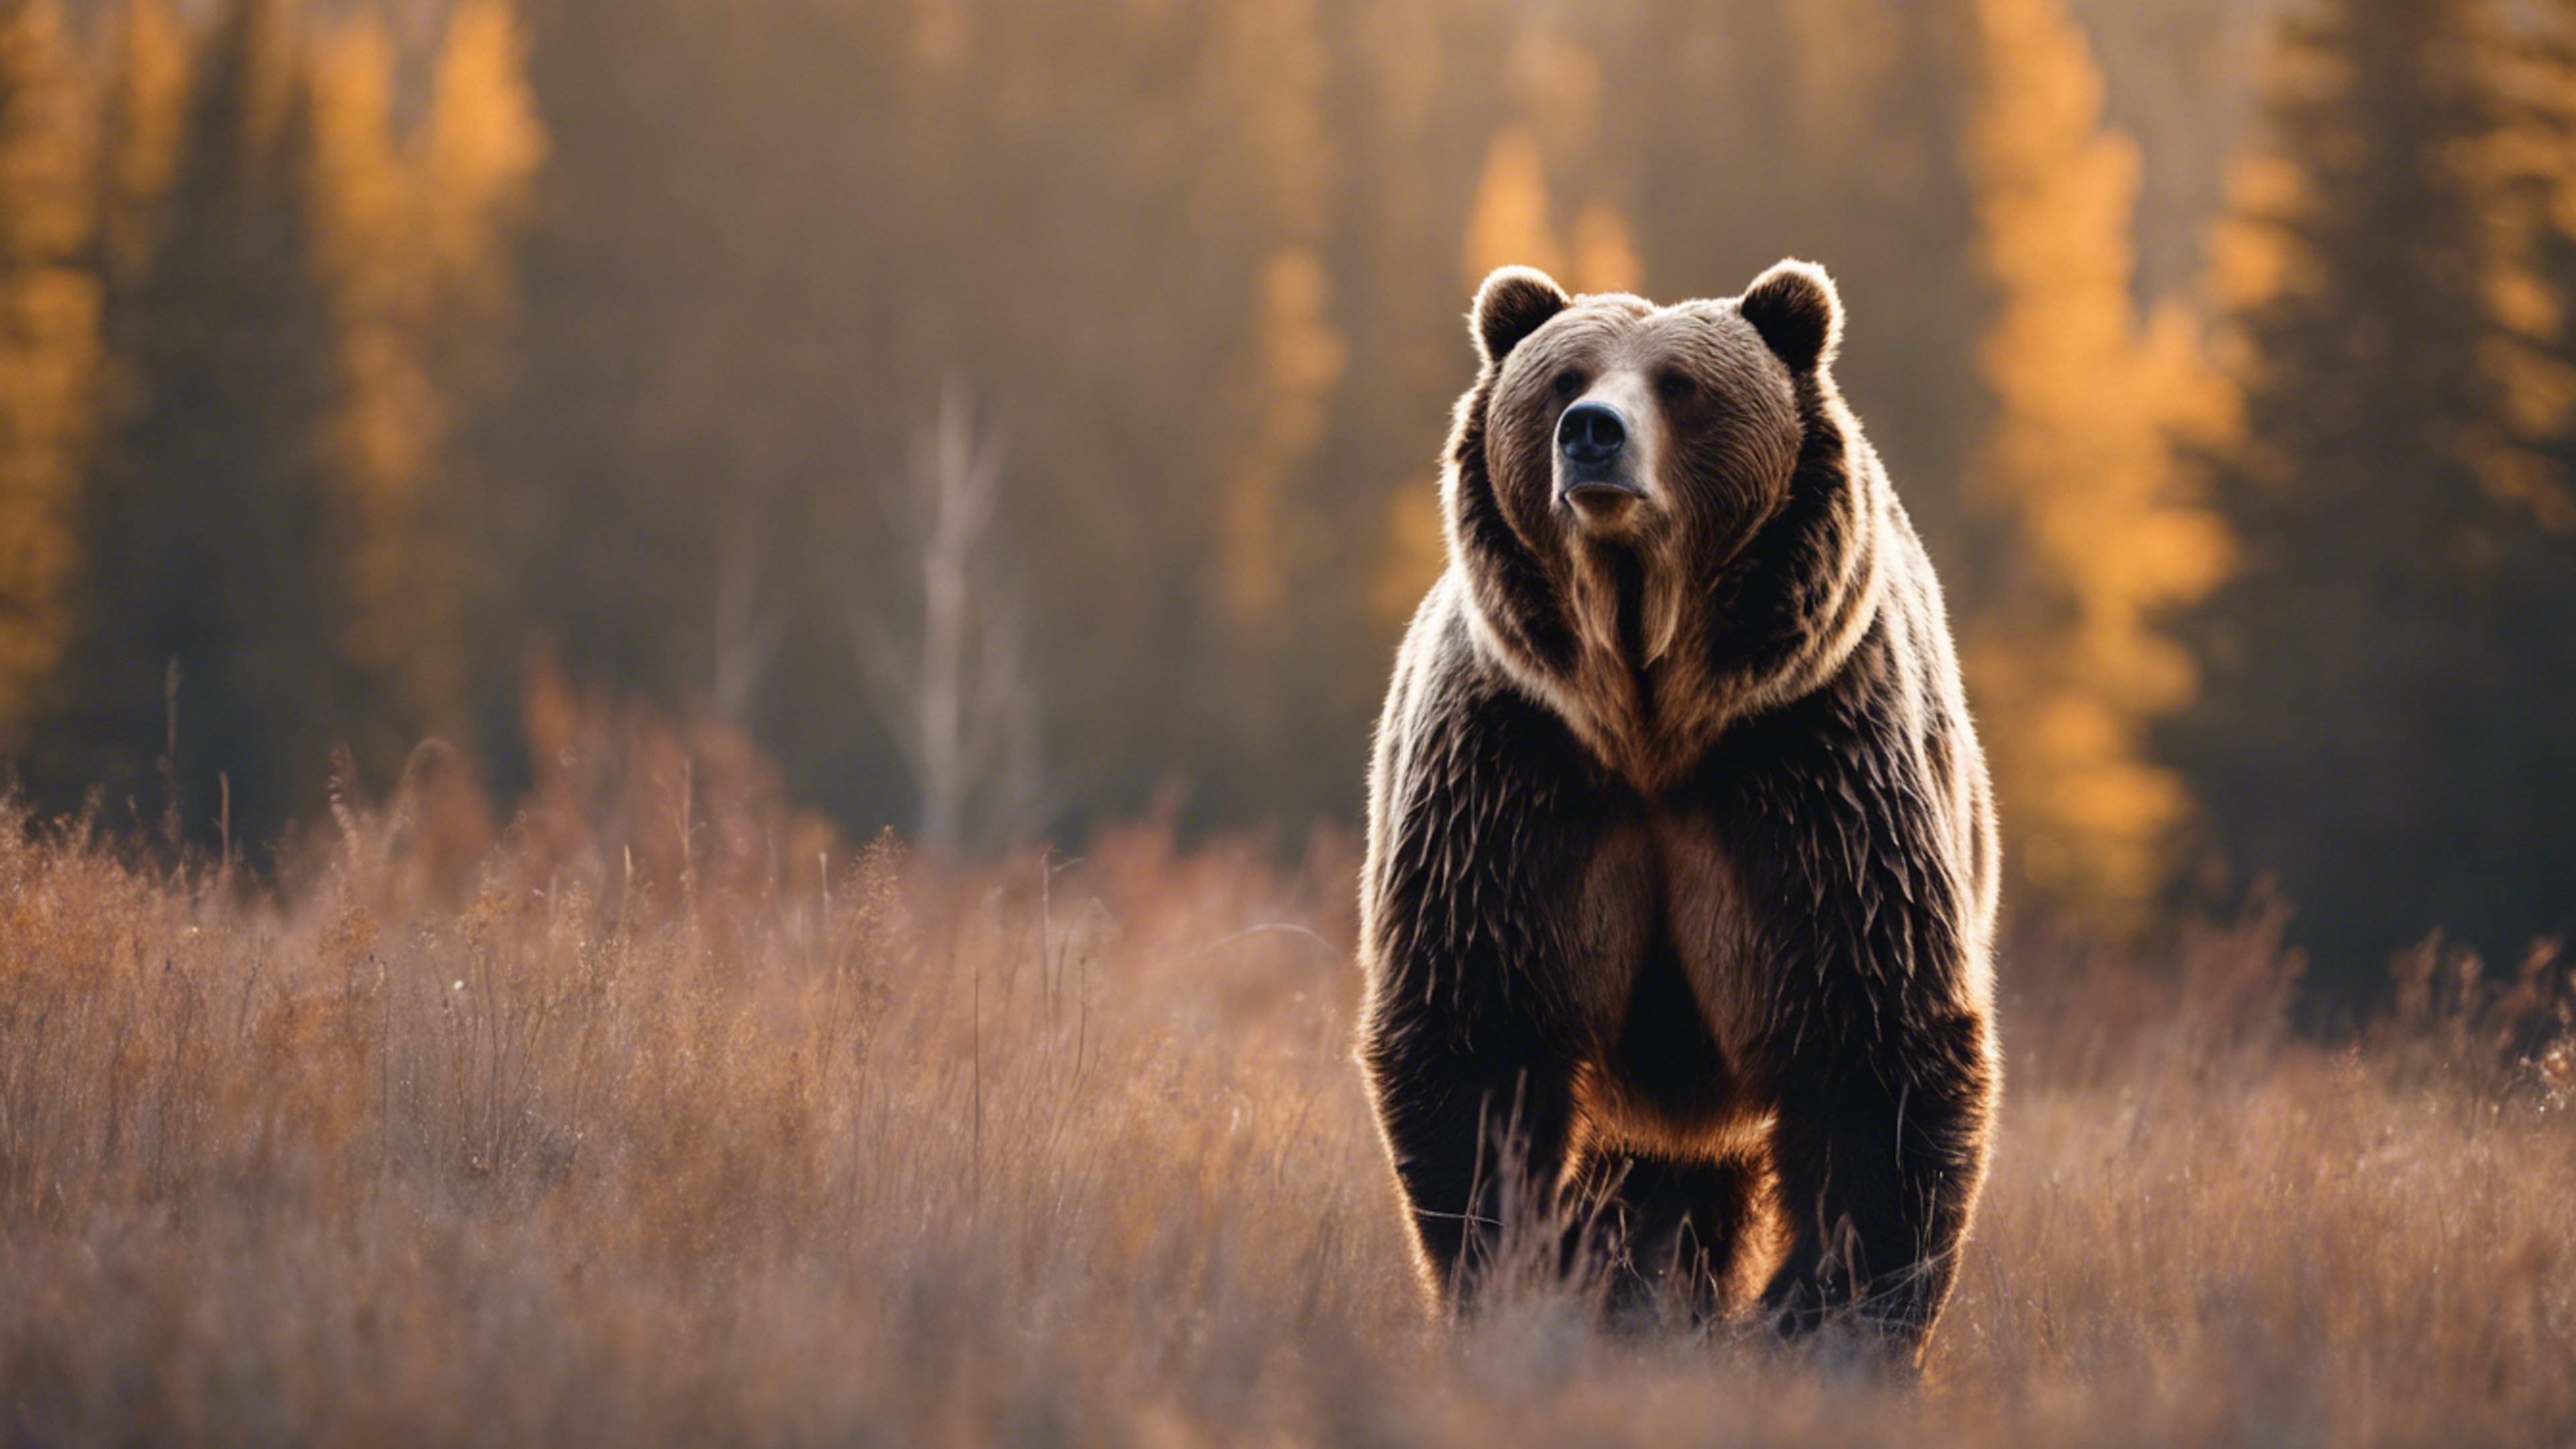 A majestic brown grizzly bear standing tall in the wild Sfondo[4fb1e3b24f2c4984aff0]